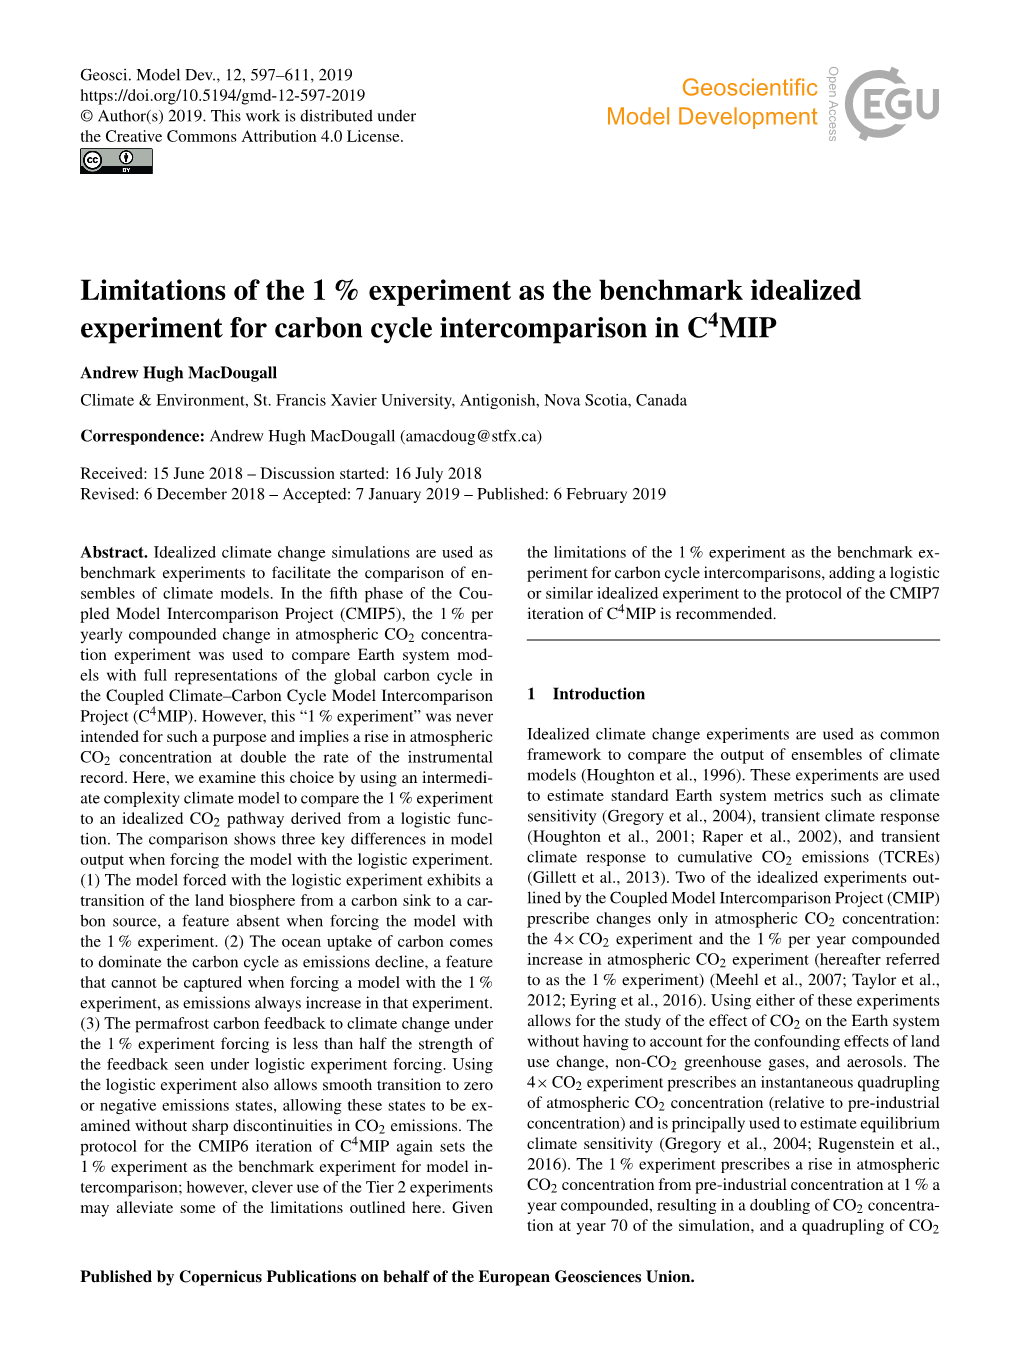 Limitations of the 1 % Experiment As the Benchmark Idealized Experiment for Carbon Cycle Intercomparison in C4MIP